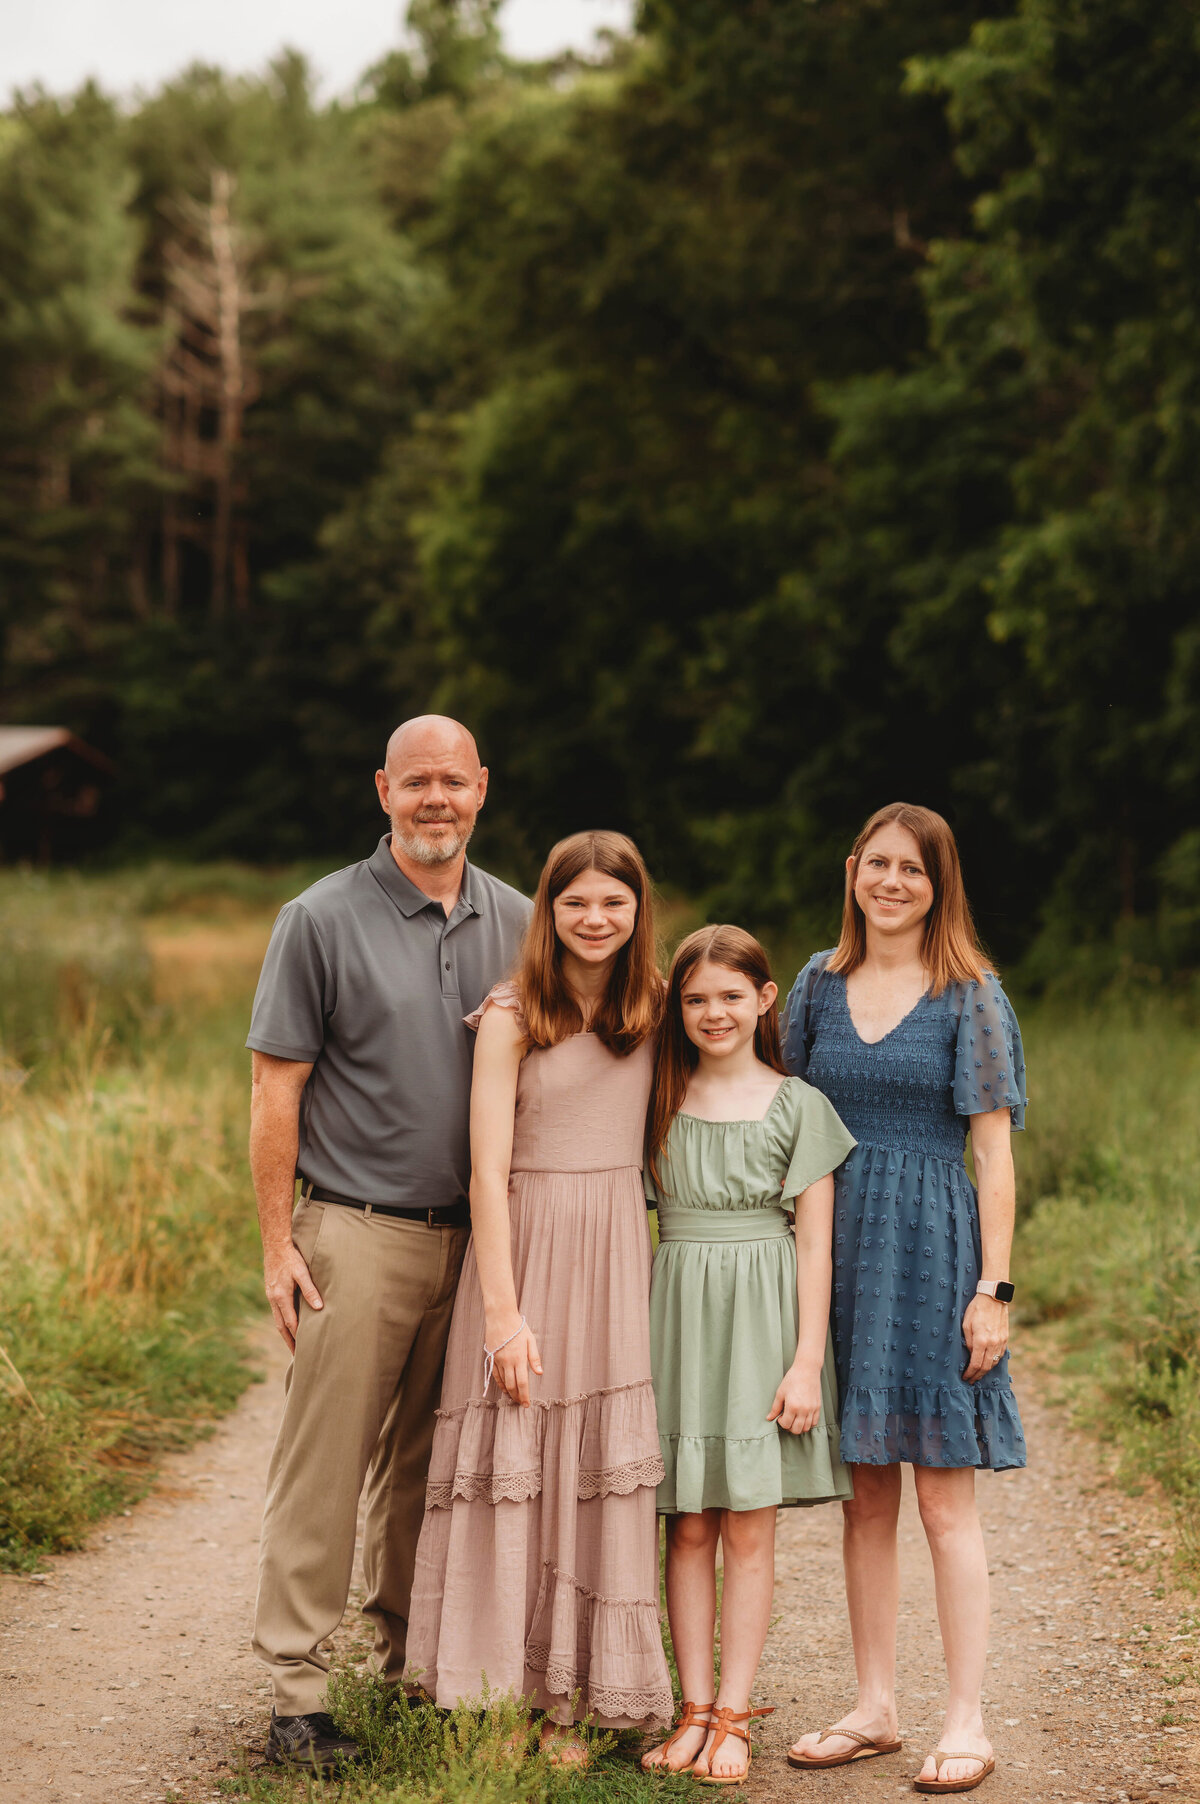 Family poses for Family Photos during an Extended Family Portrait Session in Asheville, NC.